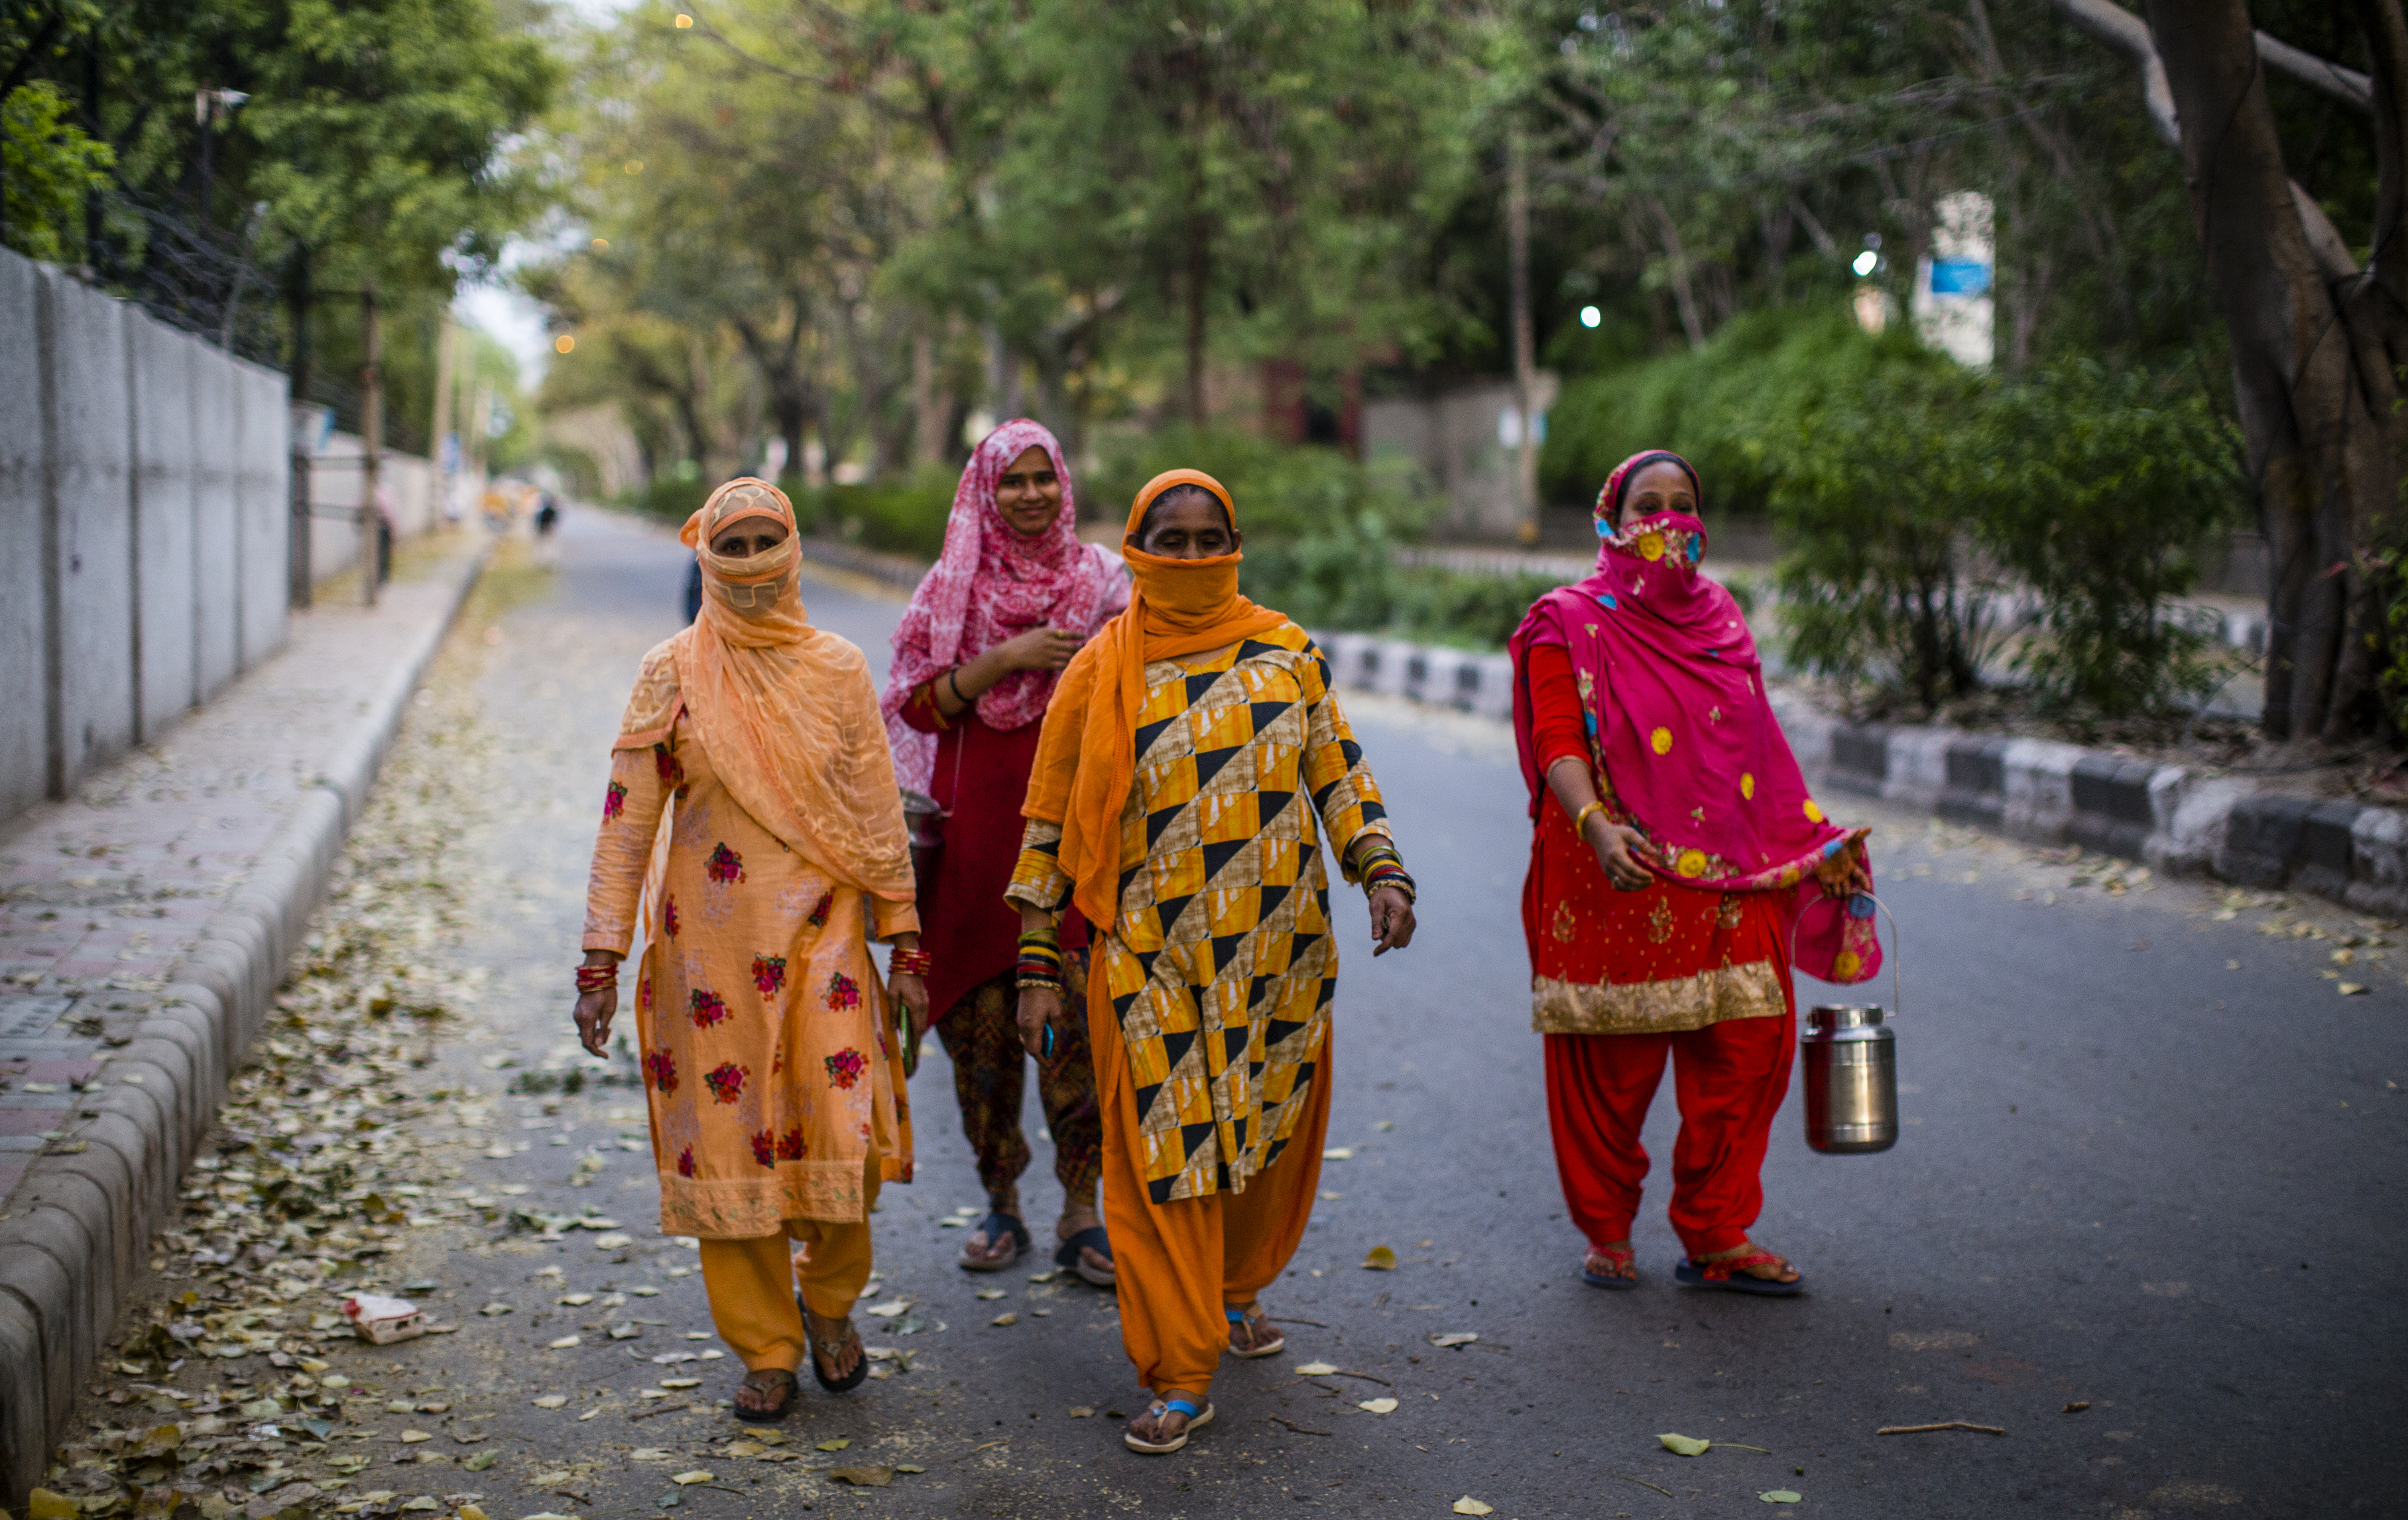 Indian women carry containers to buy milk as they walk on a deserted road , amid a nationwide lockdown.